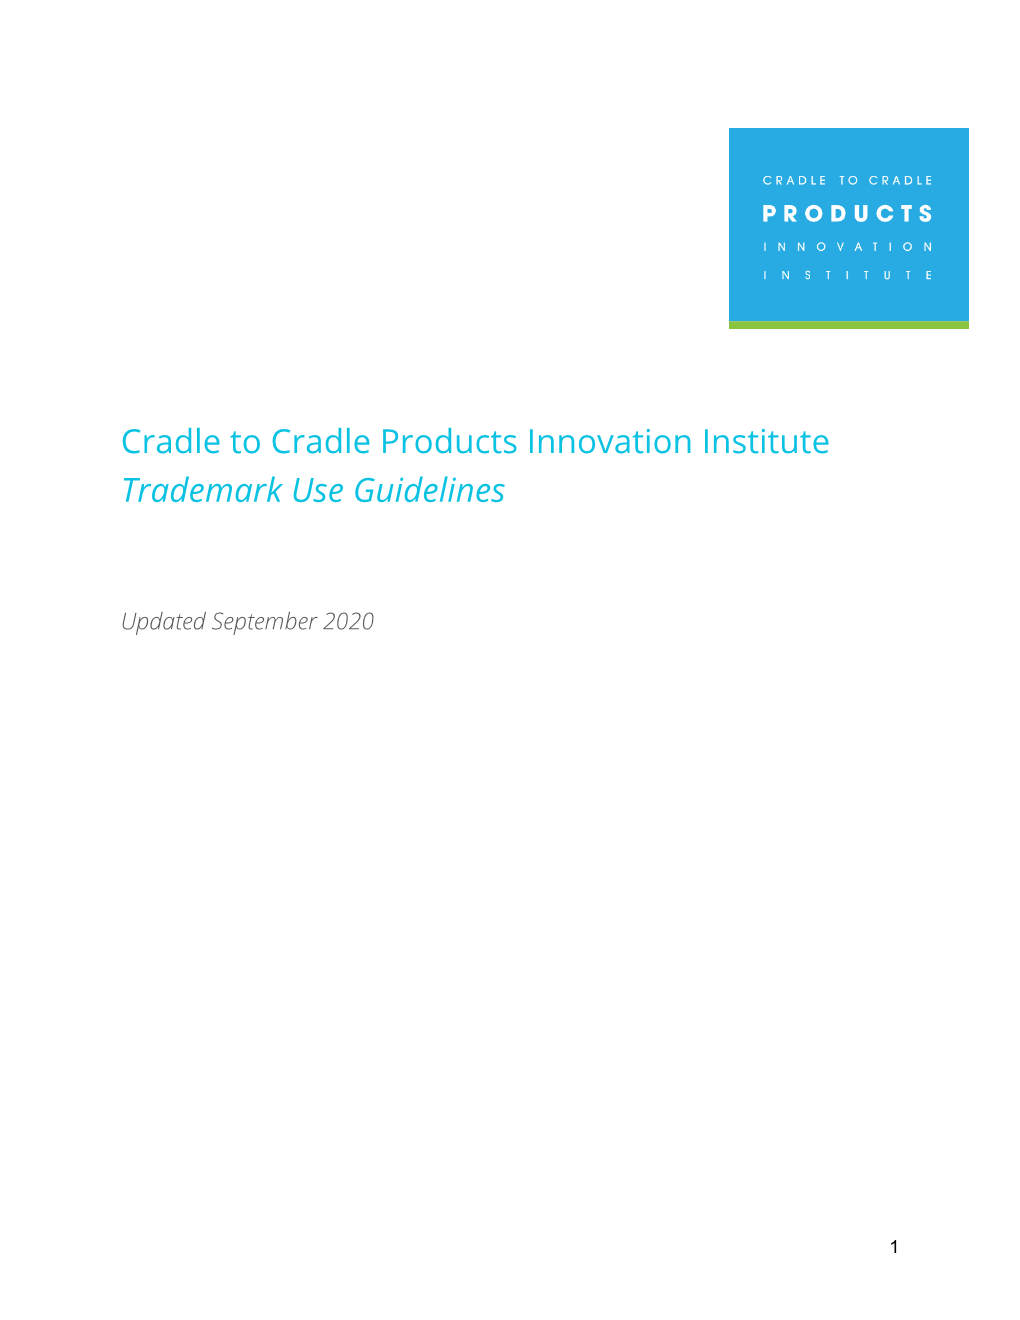 Cradle to Cradle Products Innovation Institute Trademark Use Guidelines